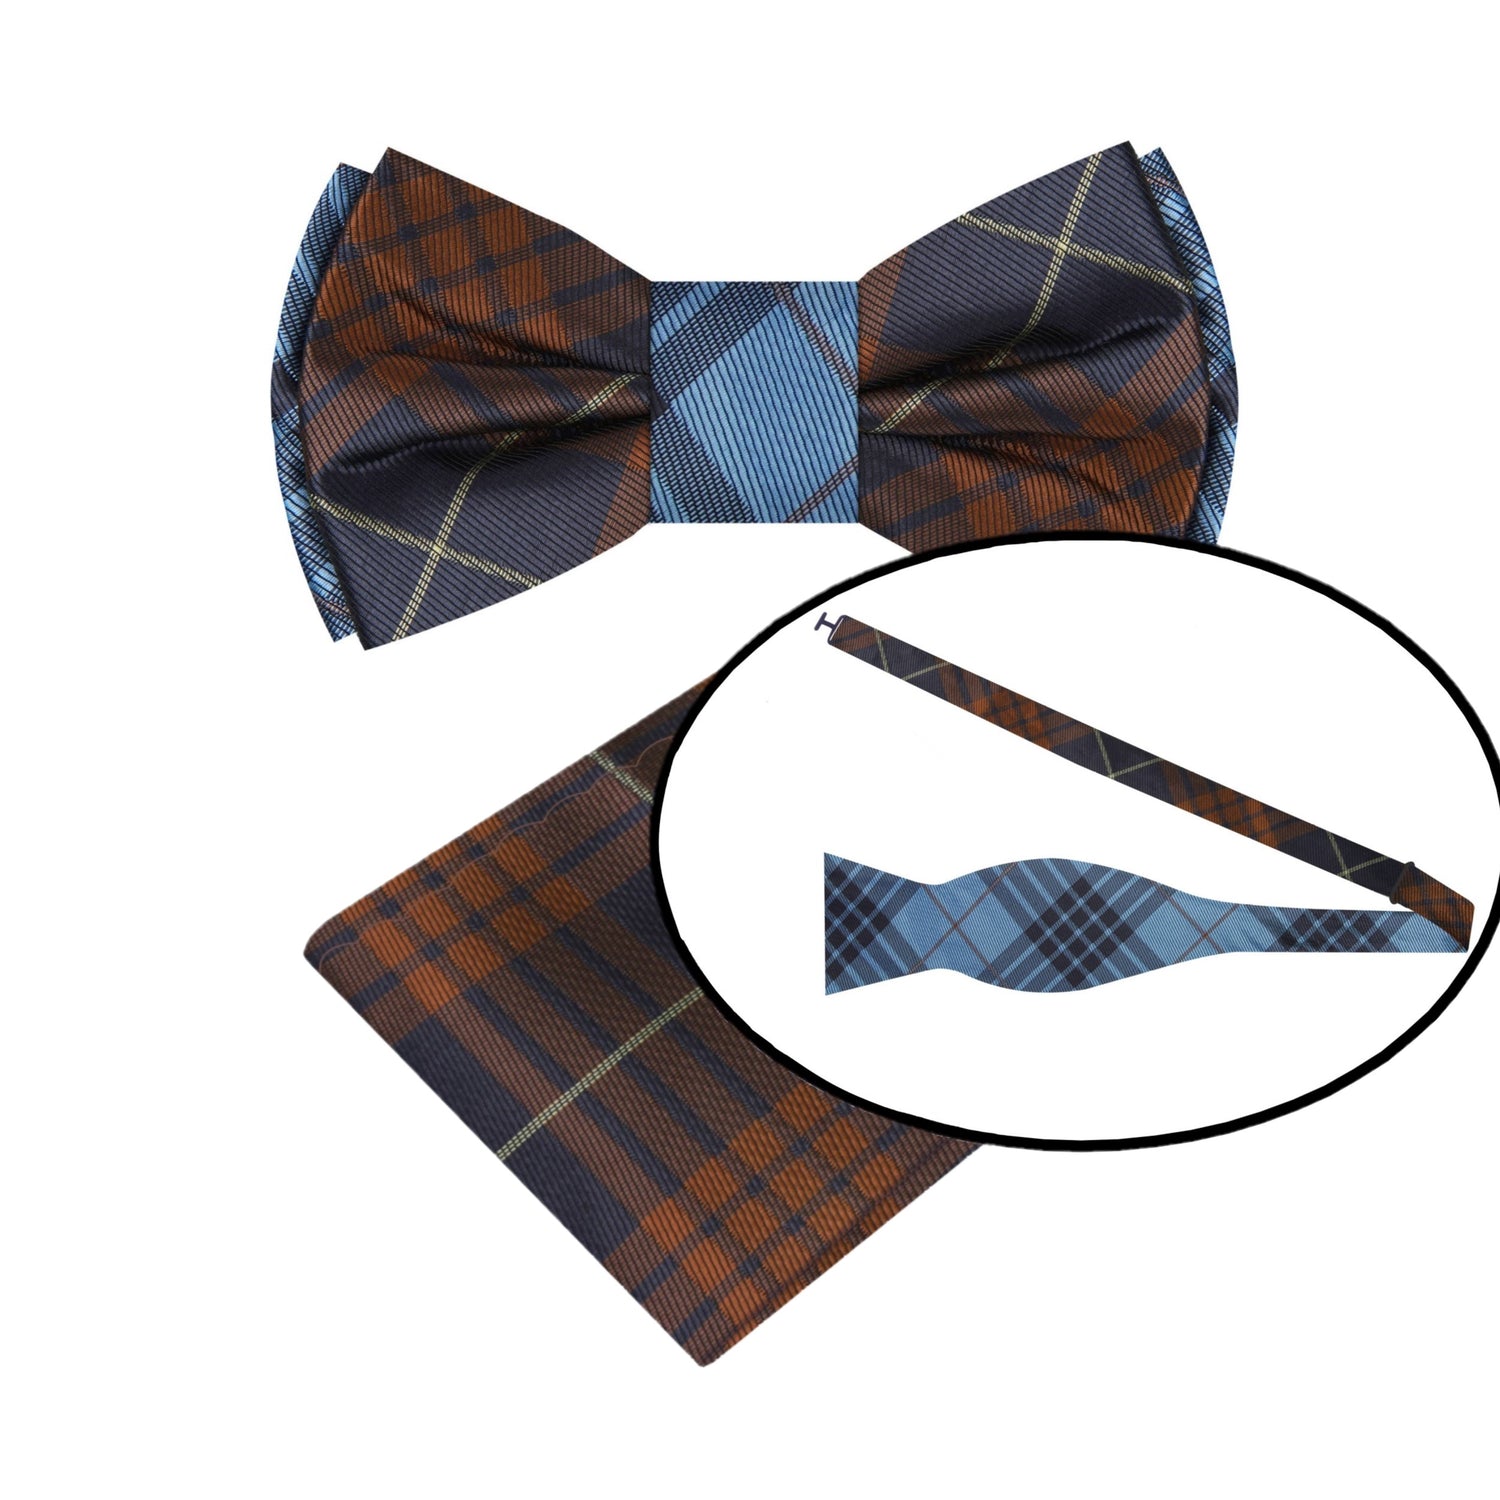 View 2: Brown, Blue Plaid Bow Tie with Square